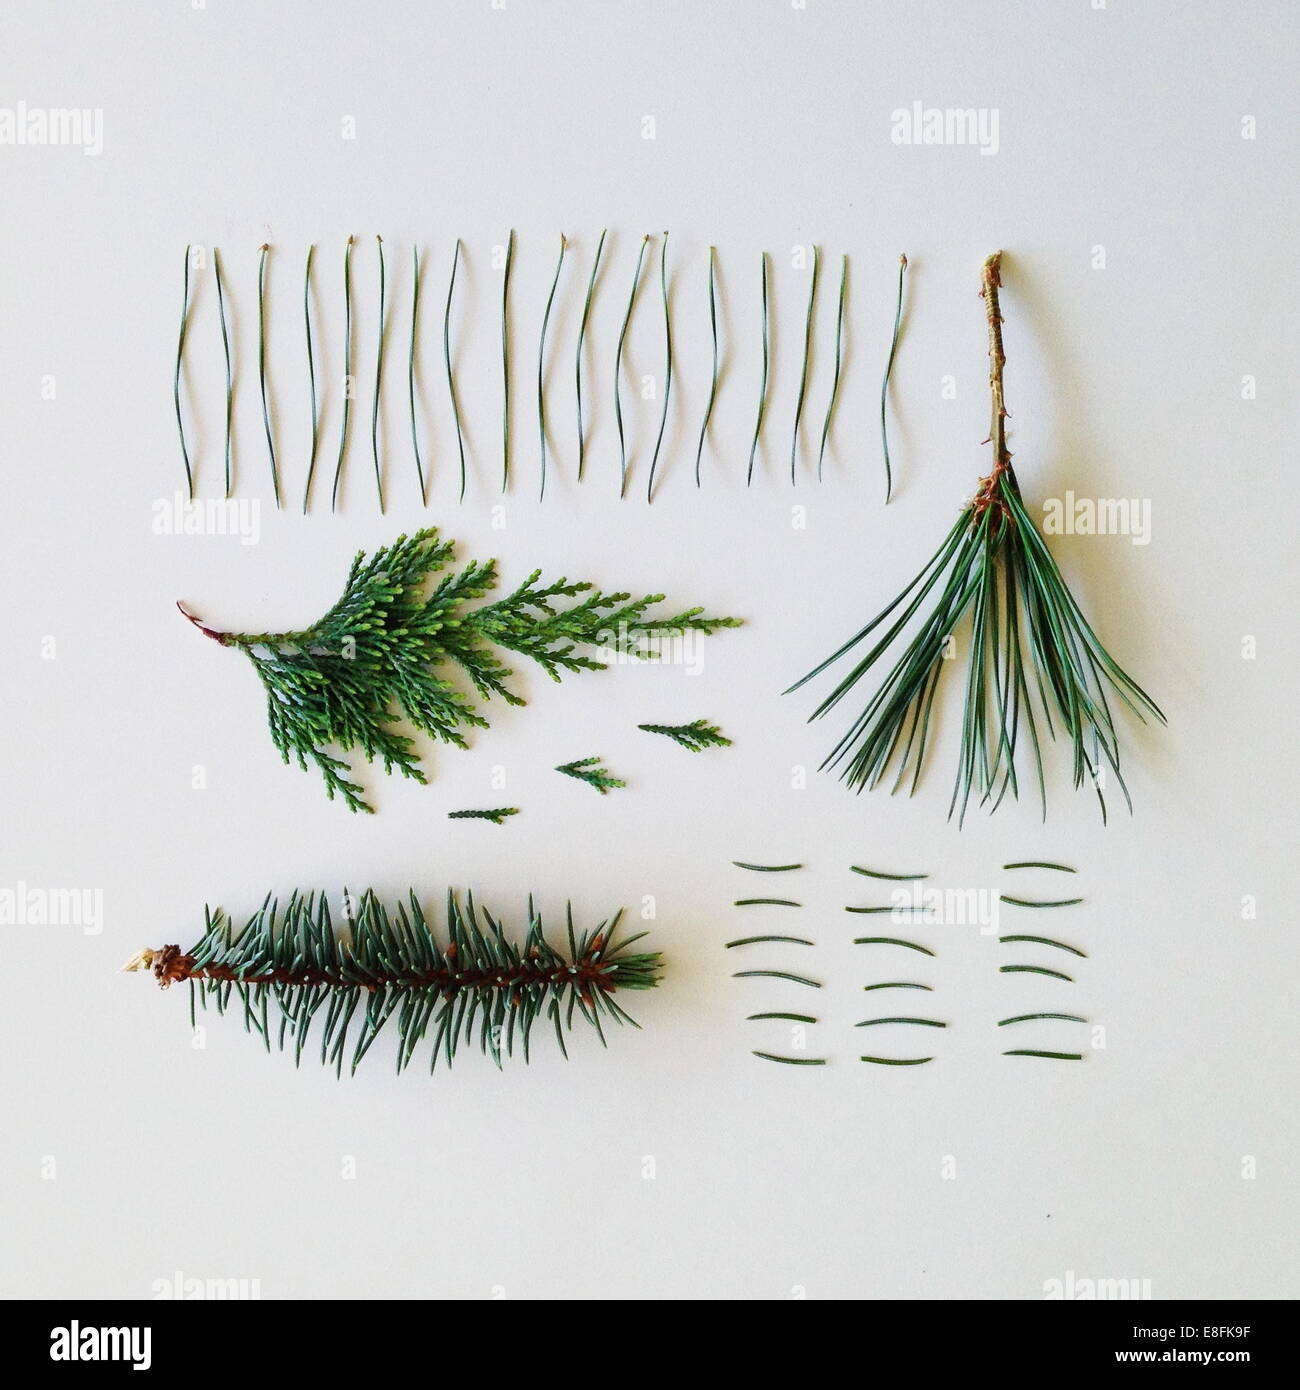 Arrangement of pine tree branches and needles Stock Photo